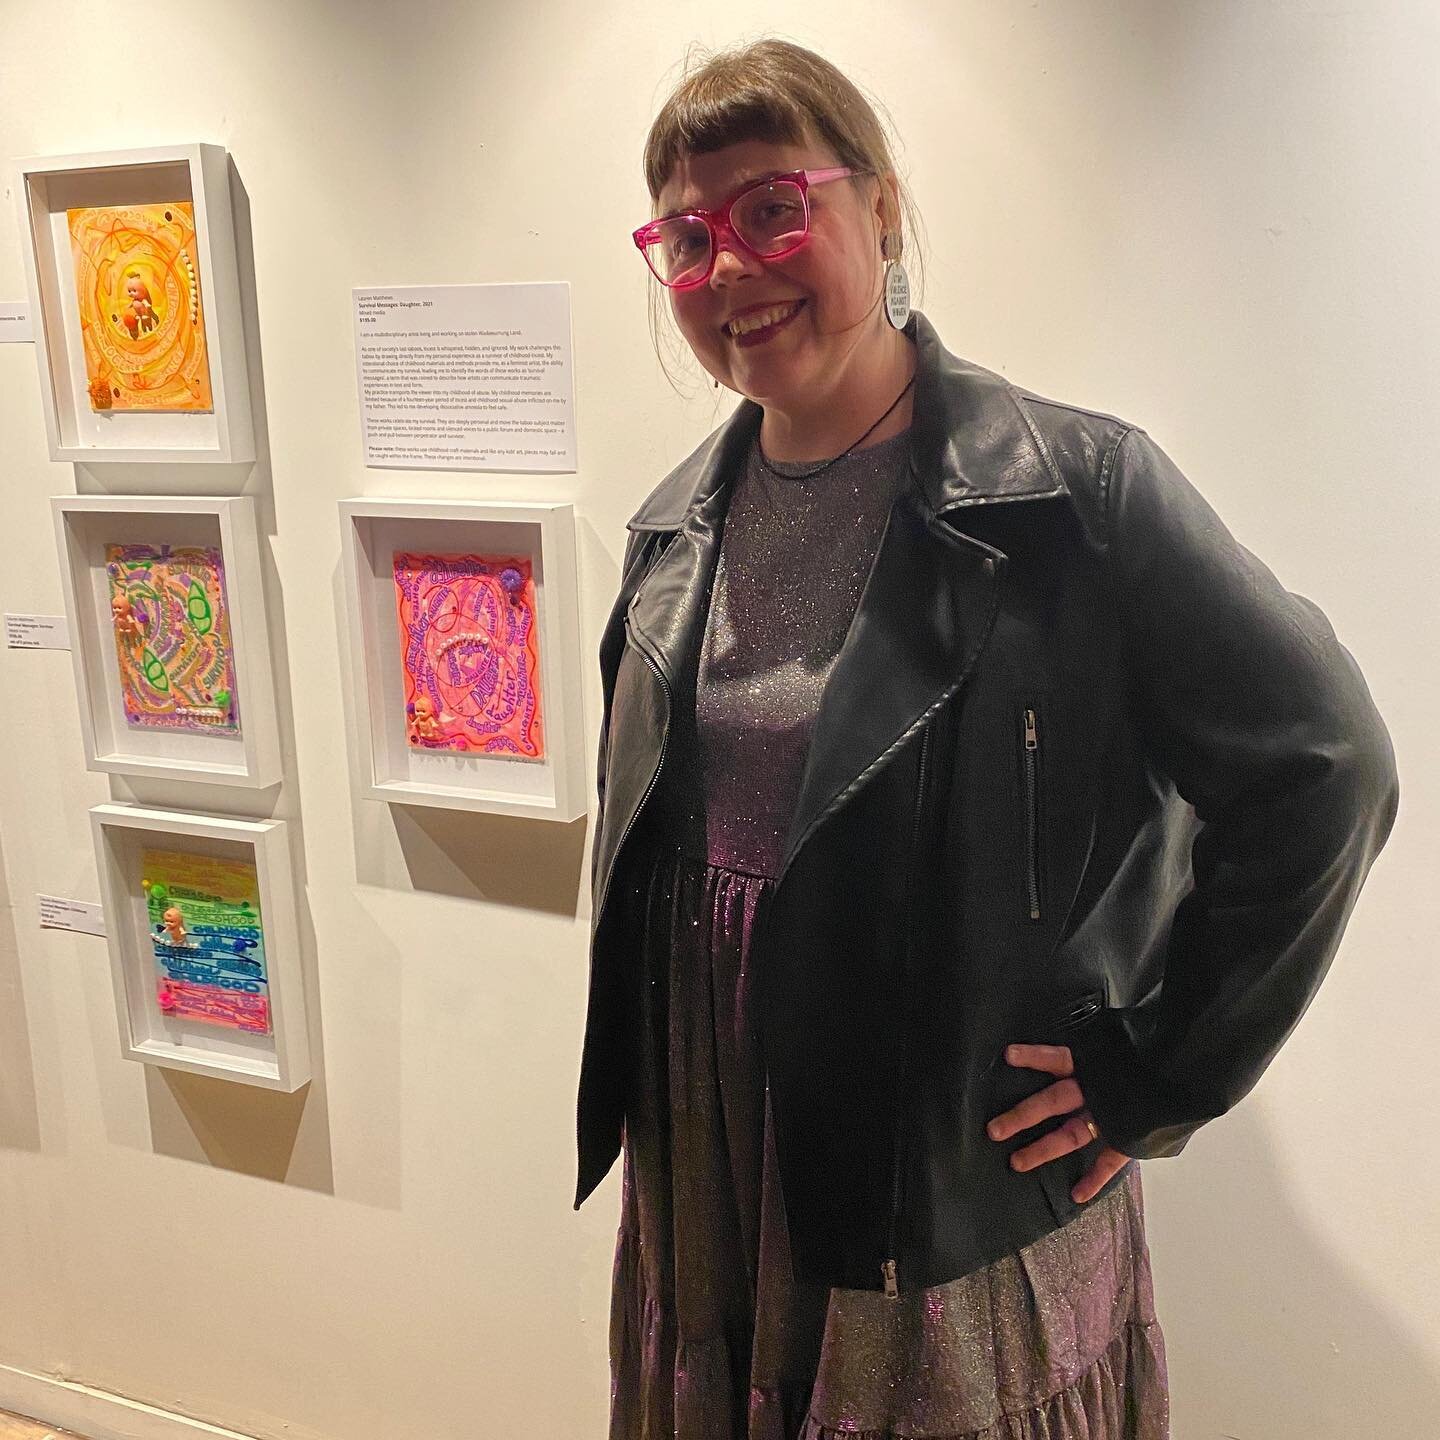 Thanks to all of my amazing supporters for coming along tonight, and to everyone for their well wishes, for the opening of Soft Rage! @gigi_gale_art thank you for curating such an important show.